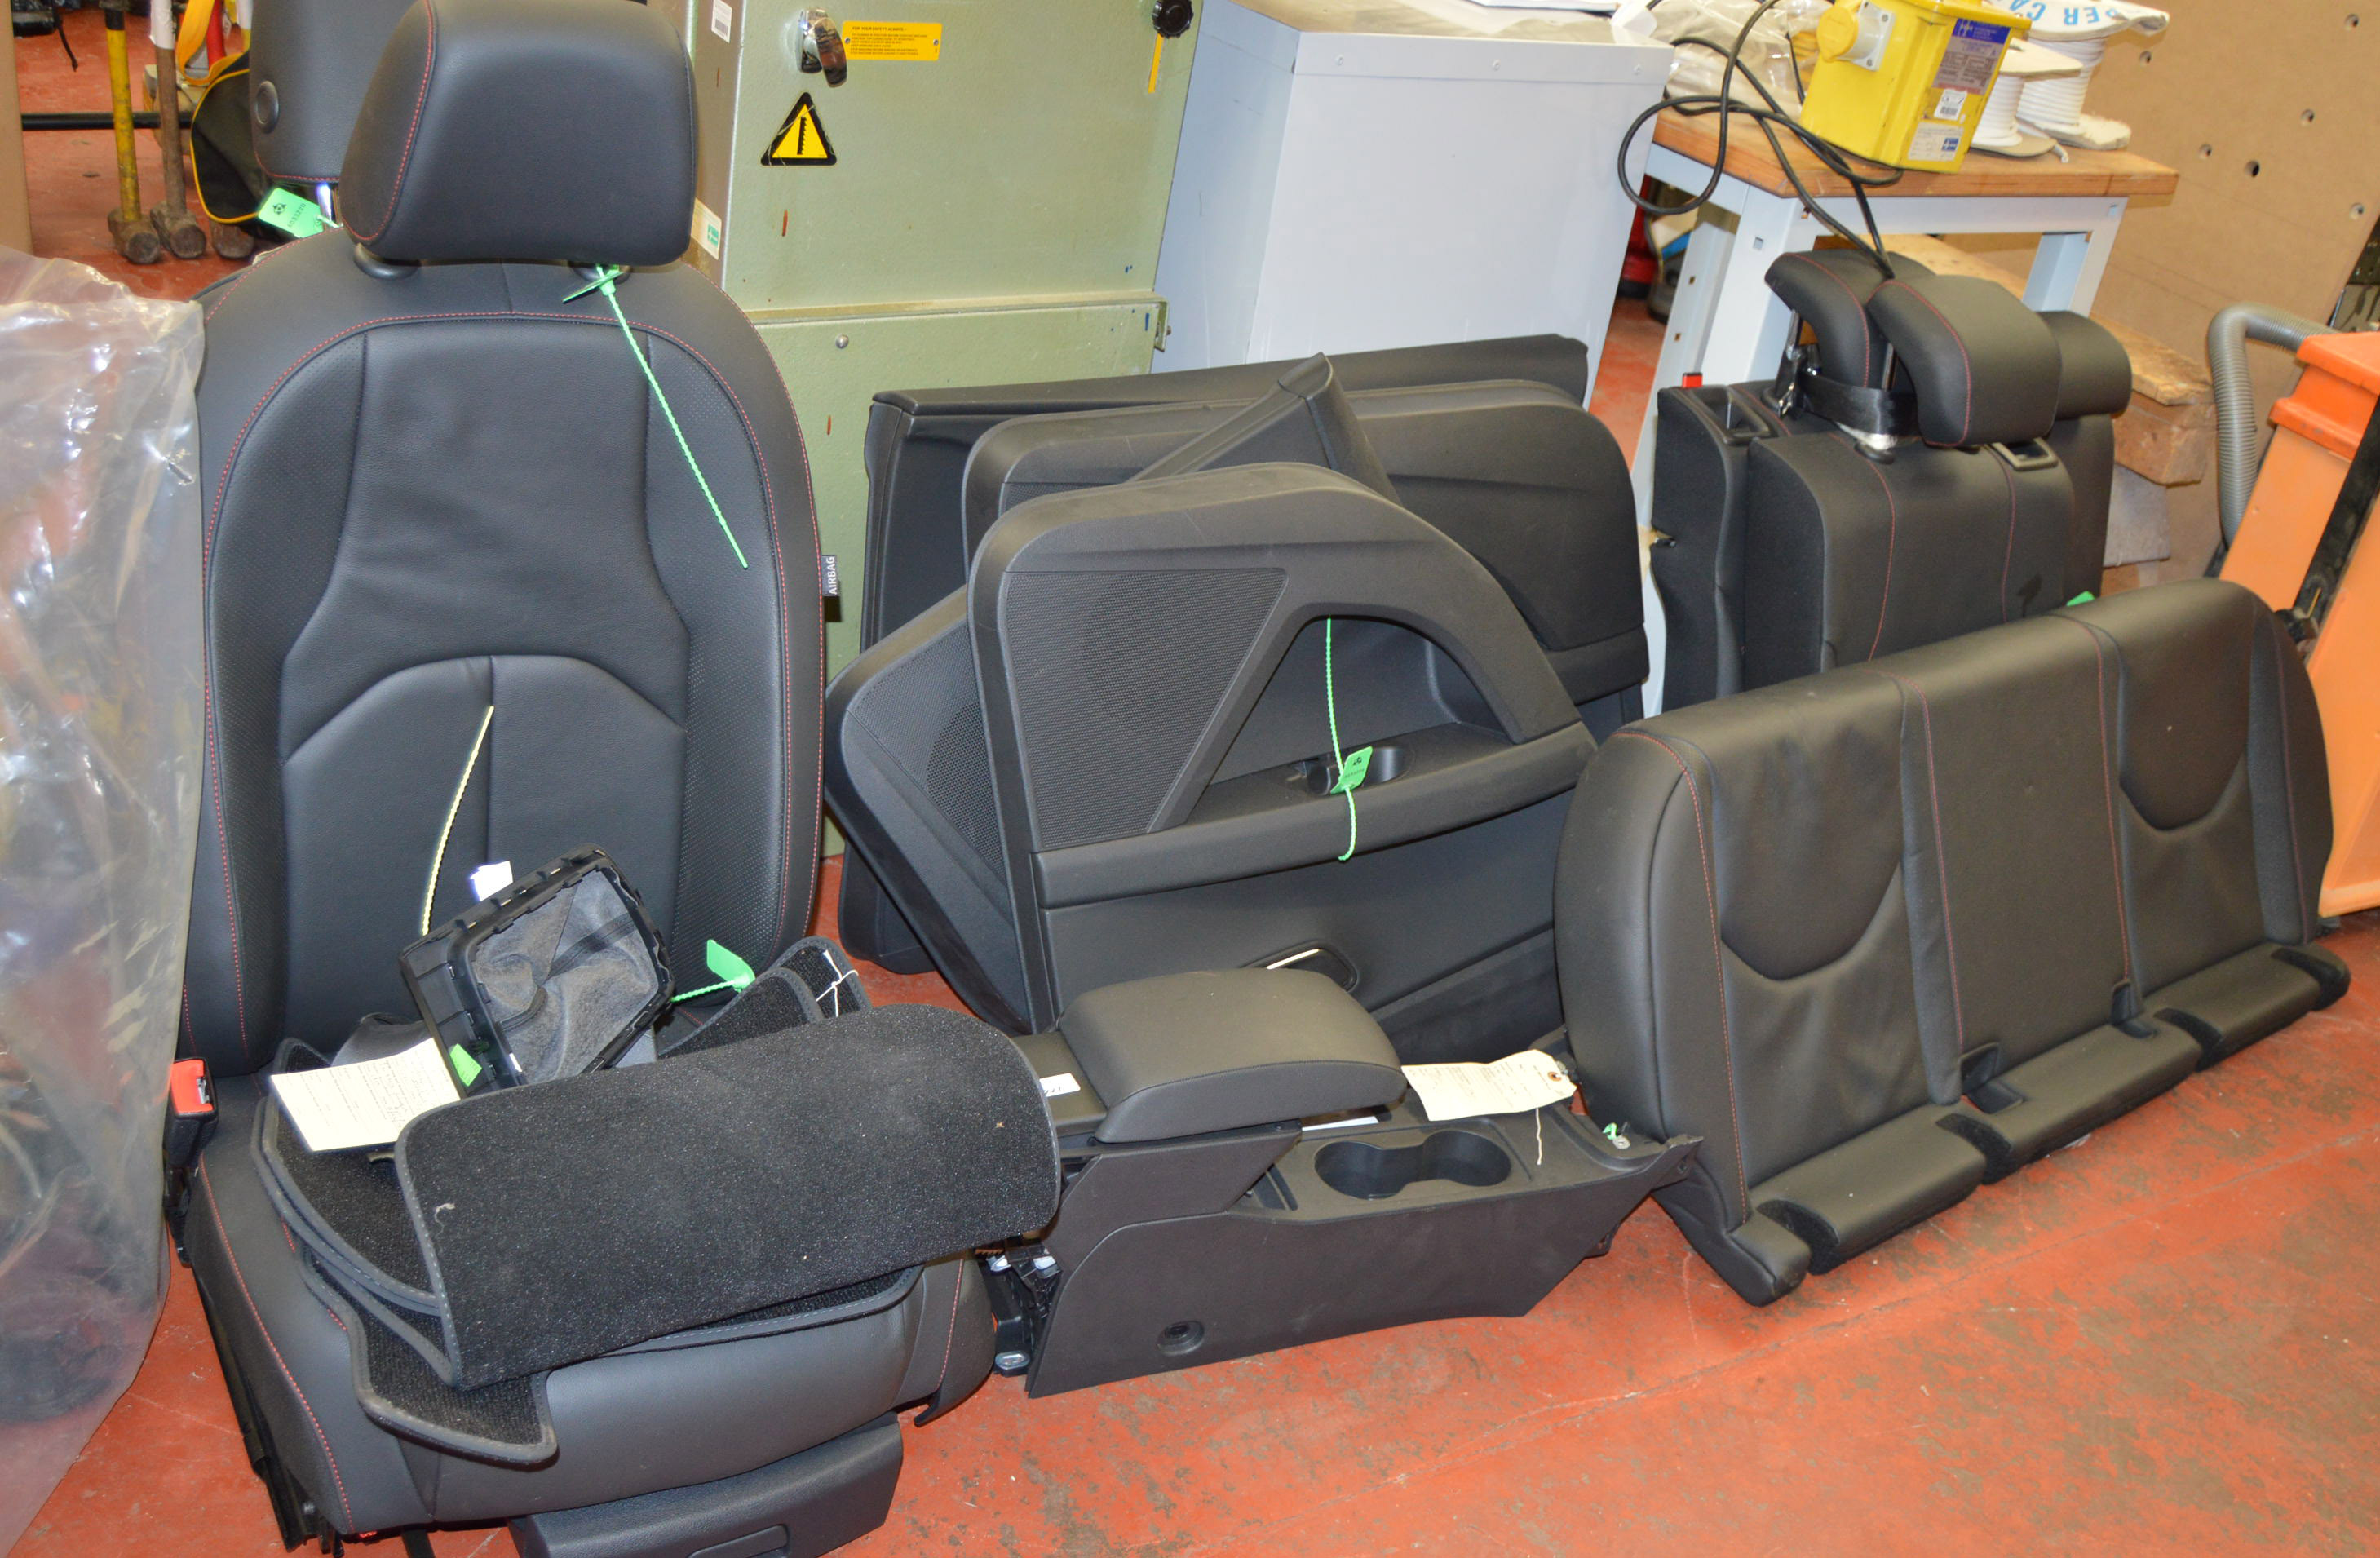 POLICE > SEAT leather car interior [VAT ON HAMMER PRICE] [NO RESERVE]